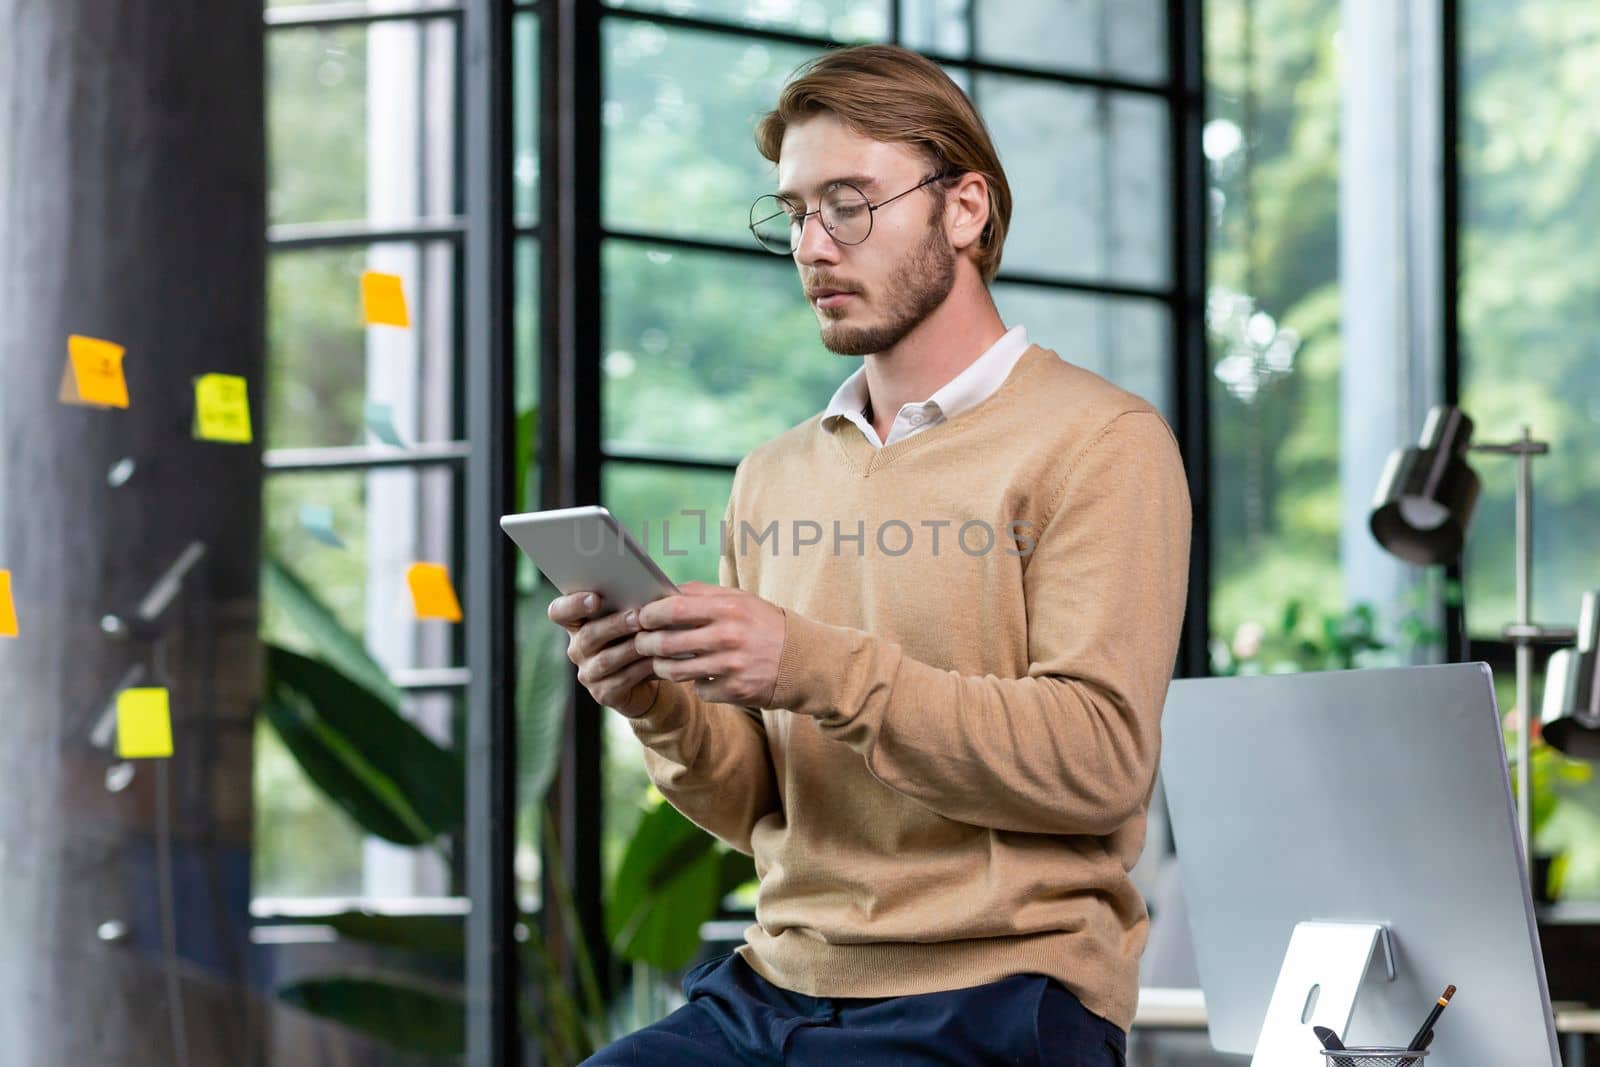 Young successful thinking programmer inside loft style office uses tablet computer, young blond man in casual clothes reads news online, serious businessman browses internet pages.